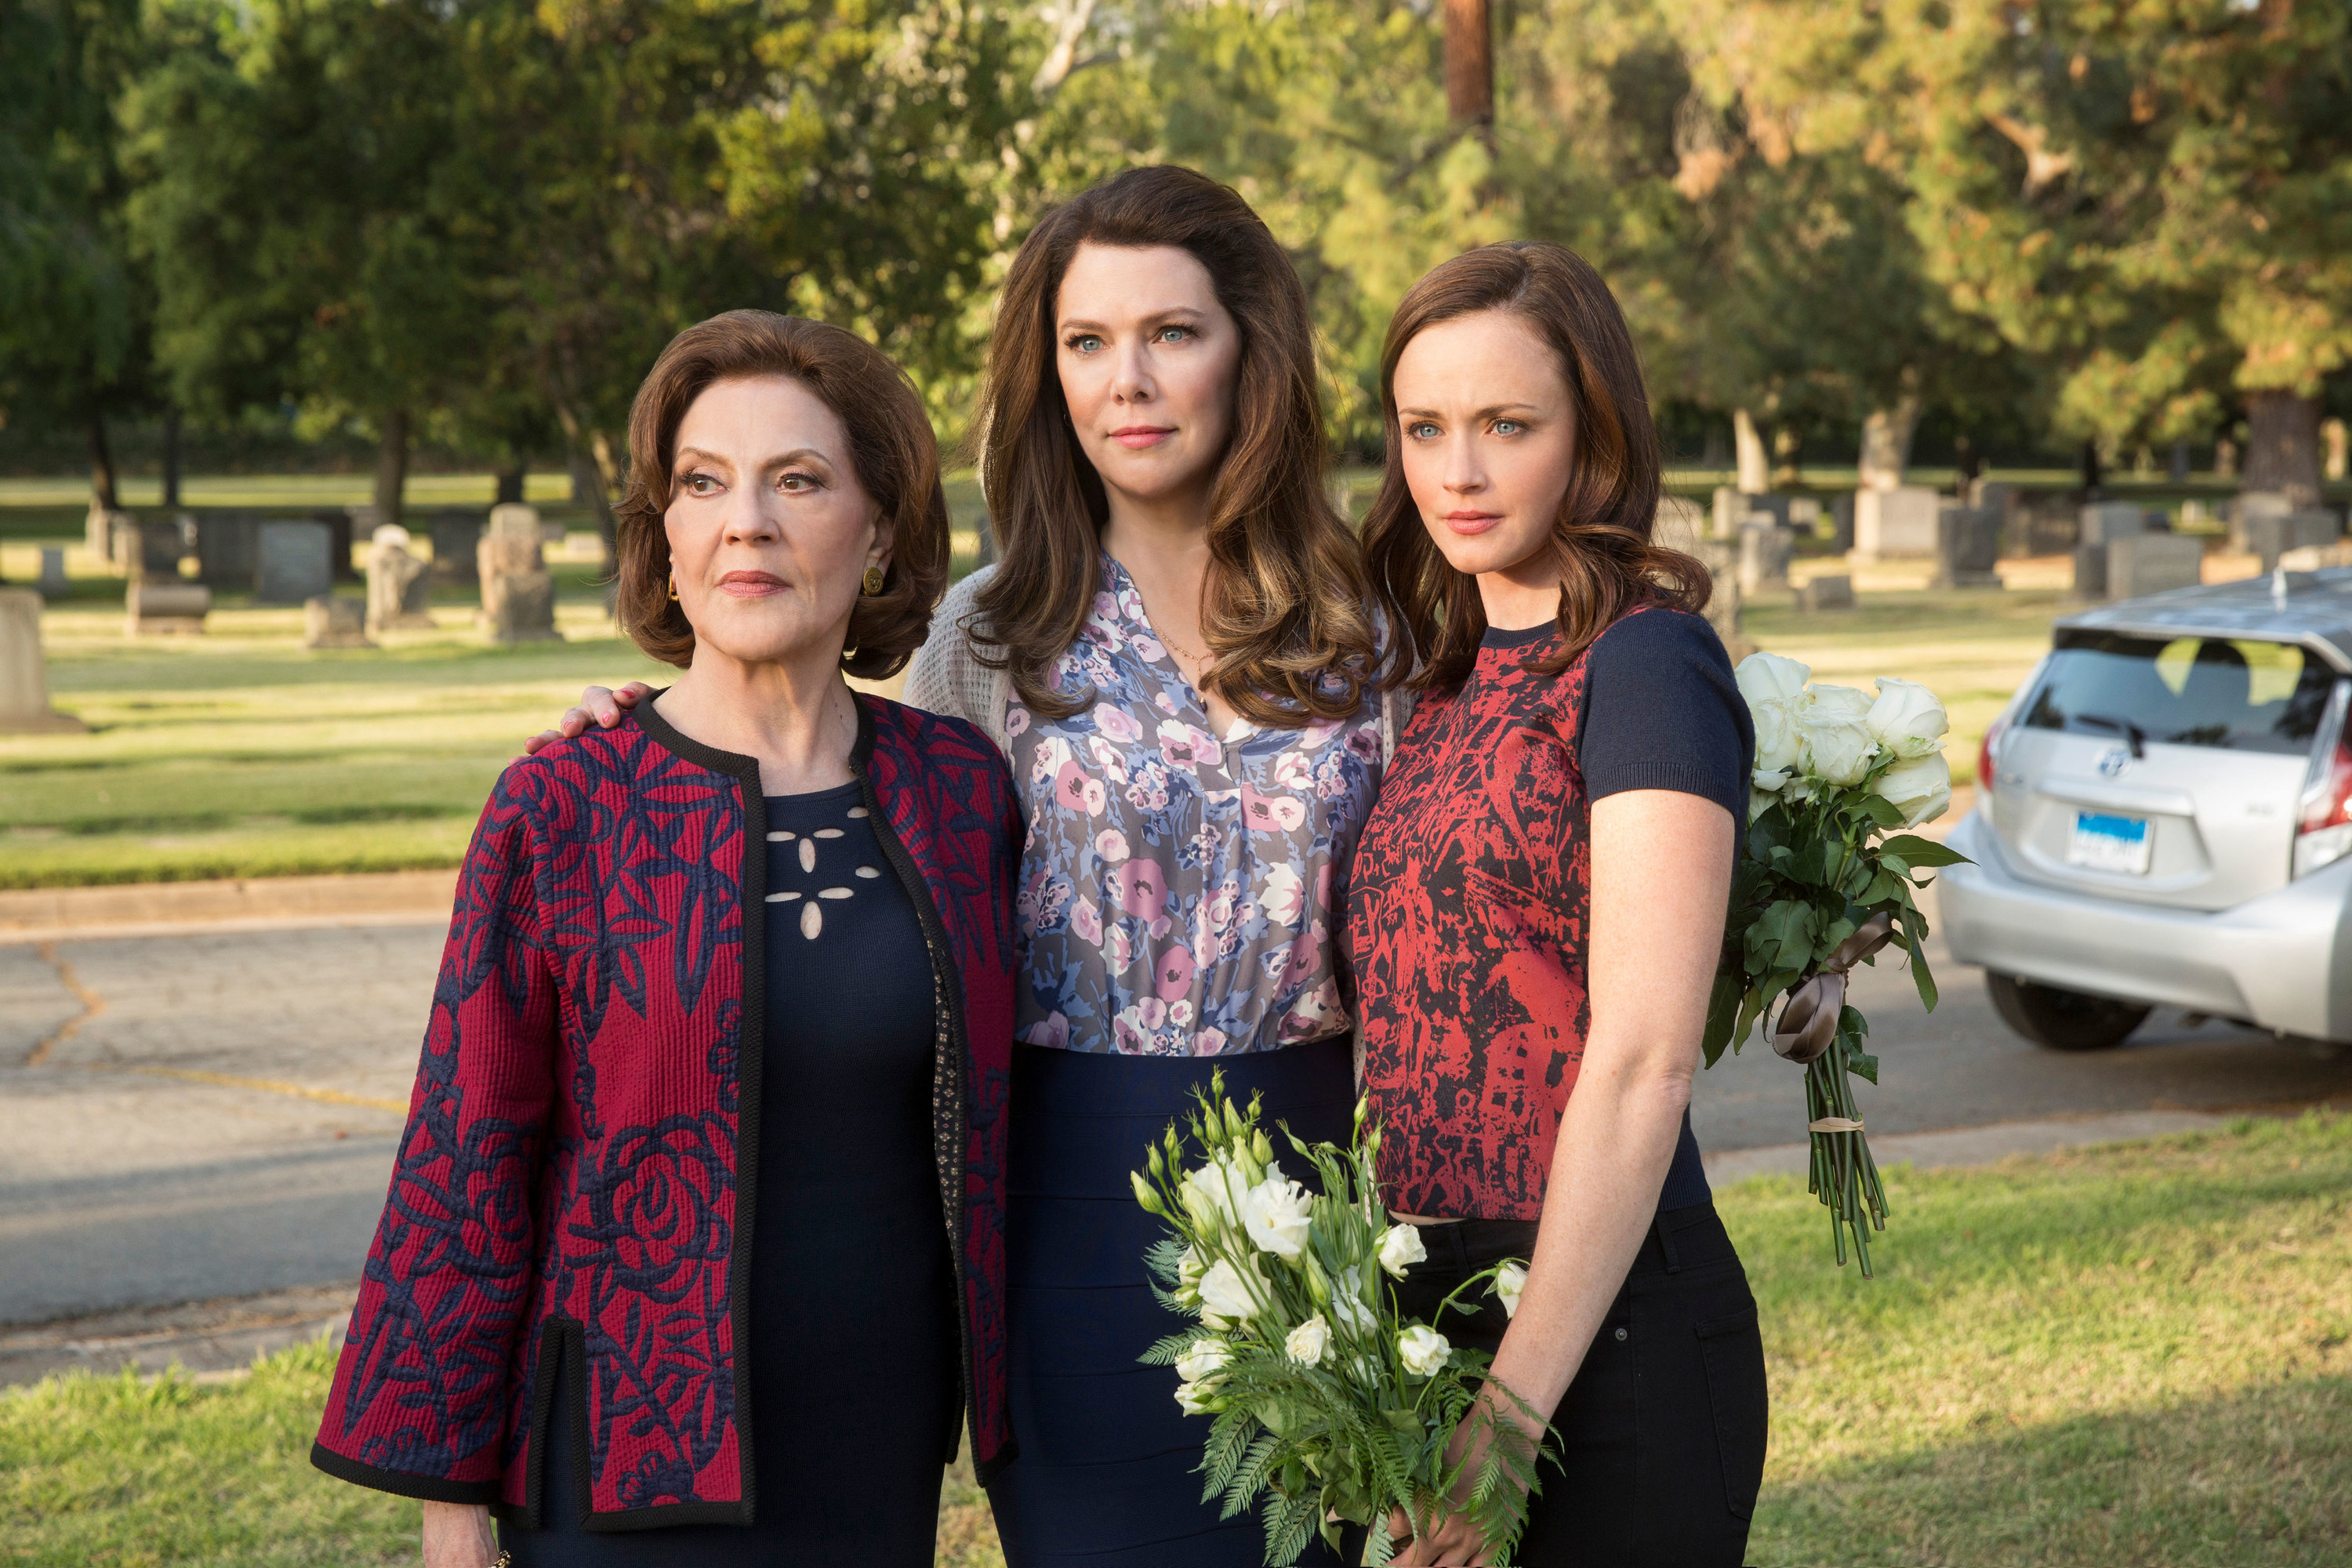 the three main women standing outside holding flowers